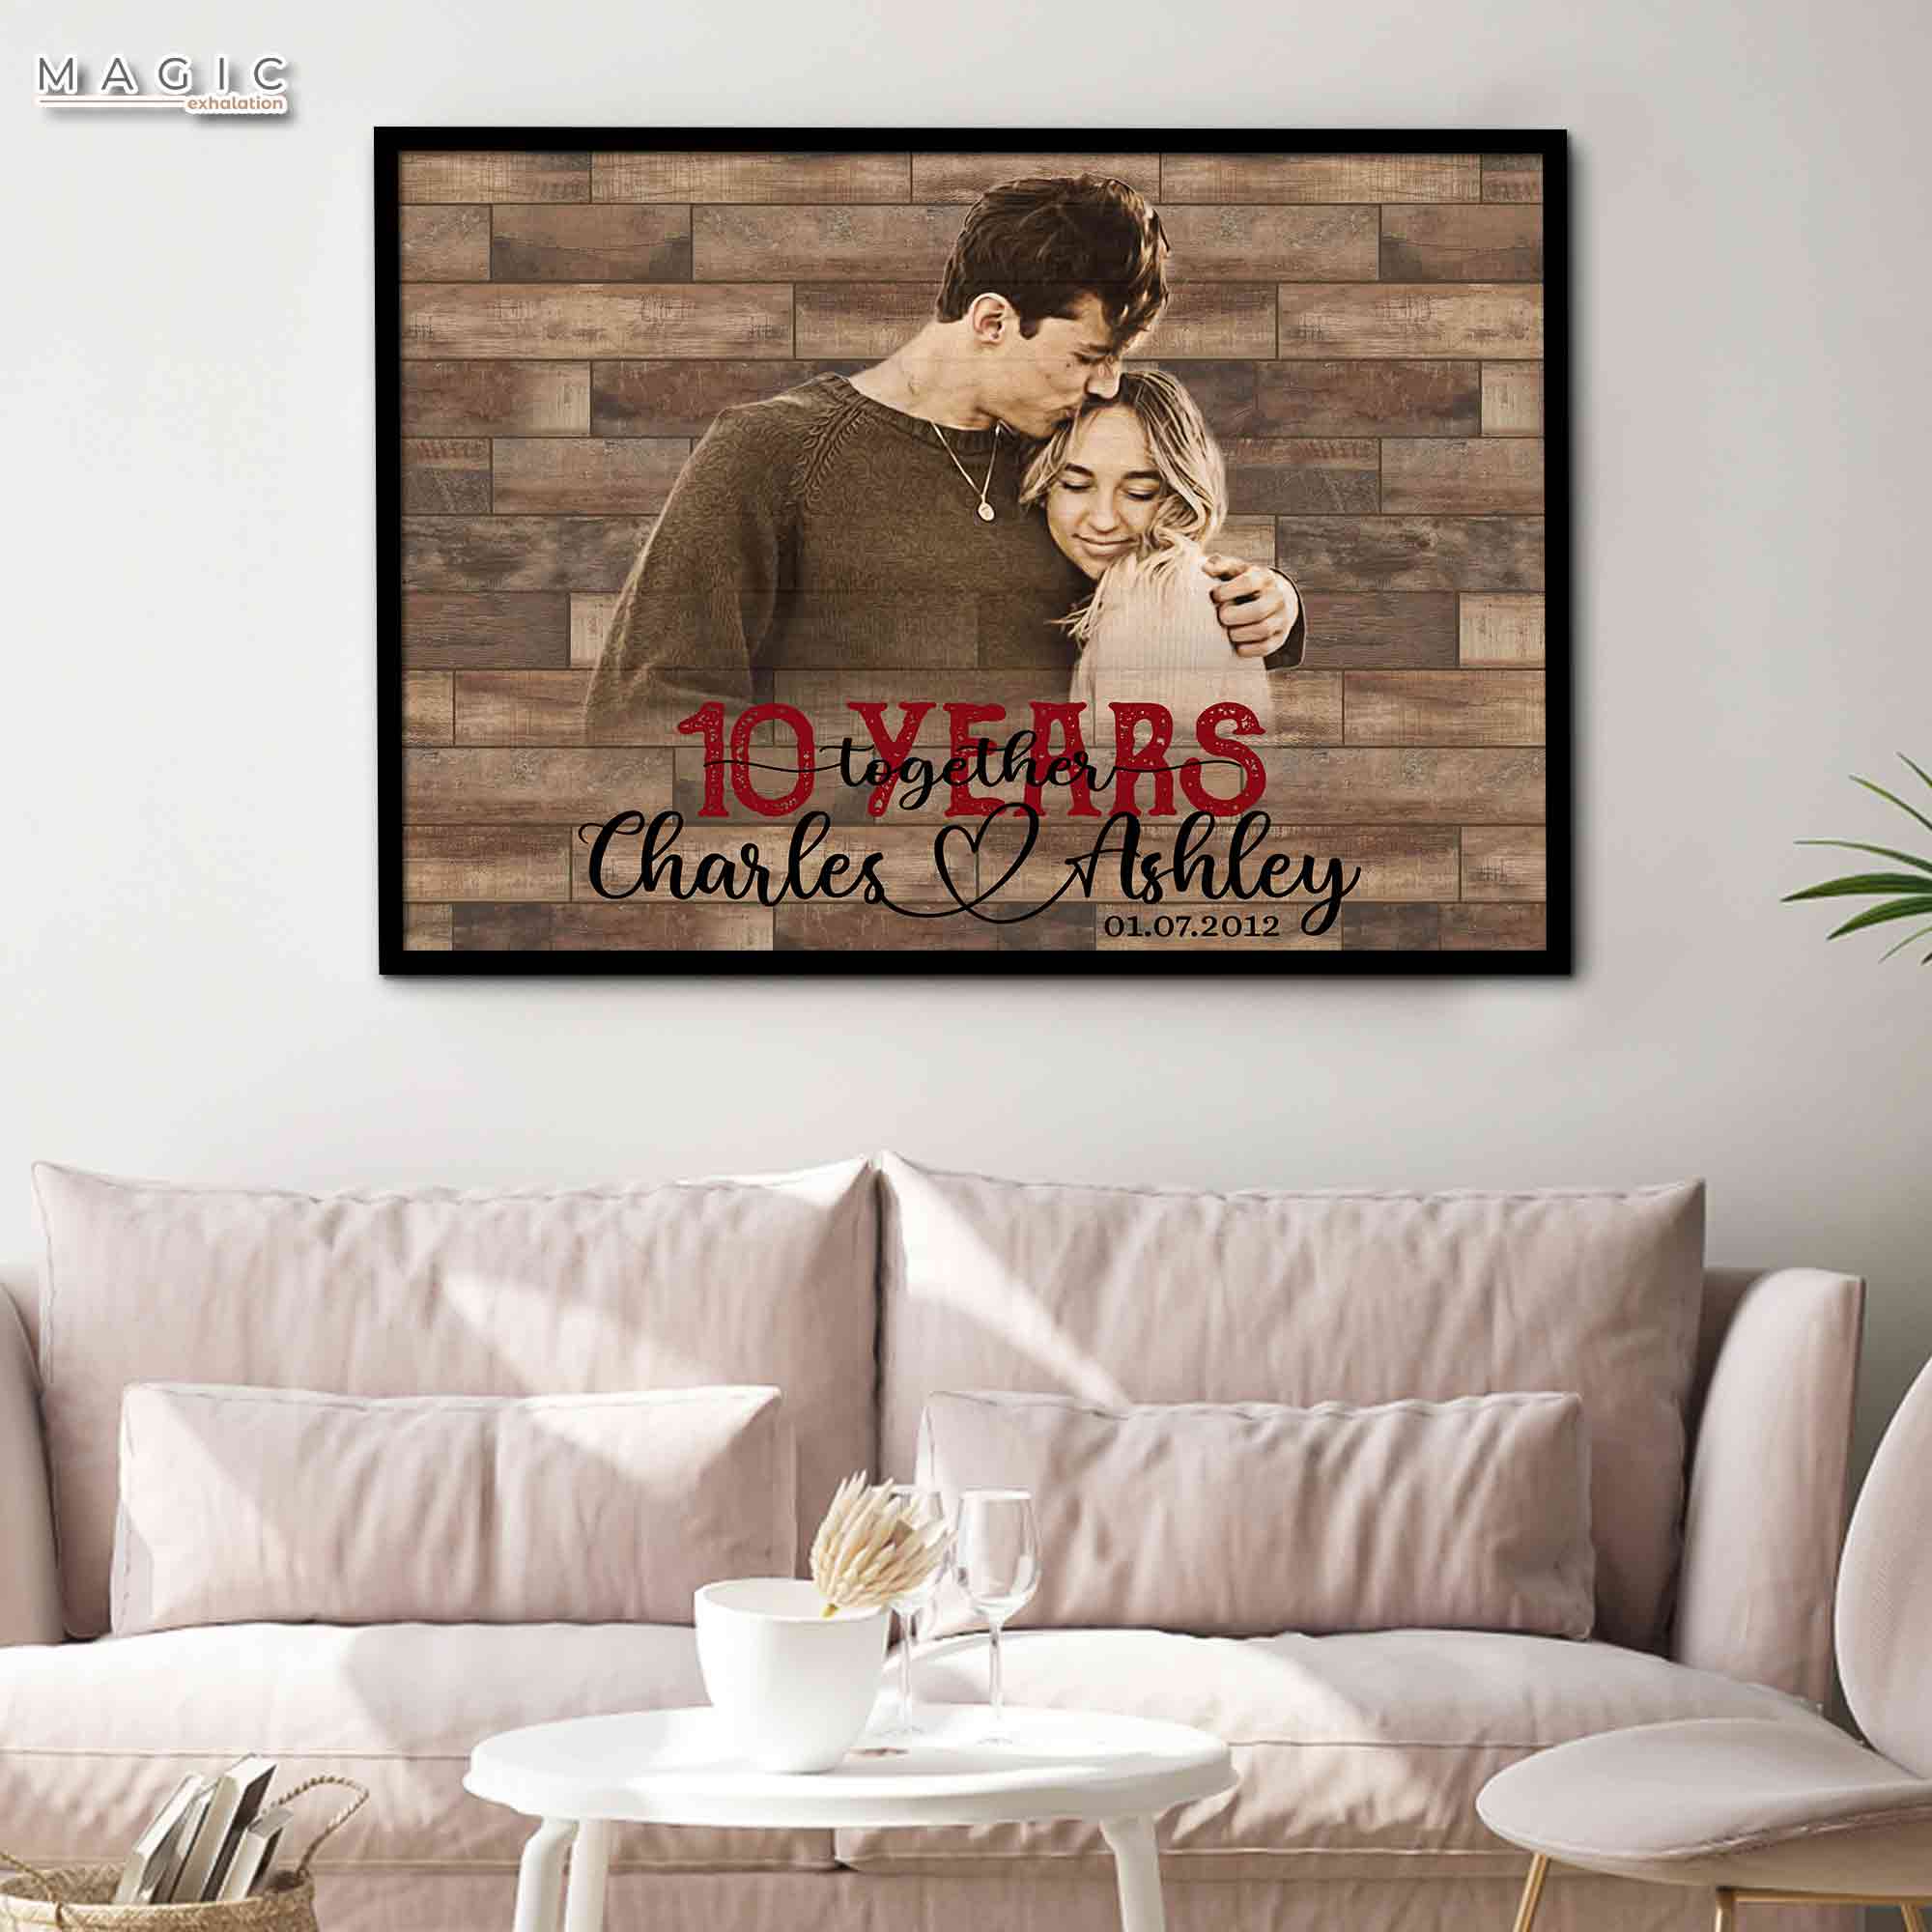 10th anniversary gift for wife, 10 year anniversary gift ideas,